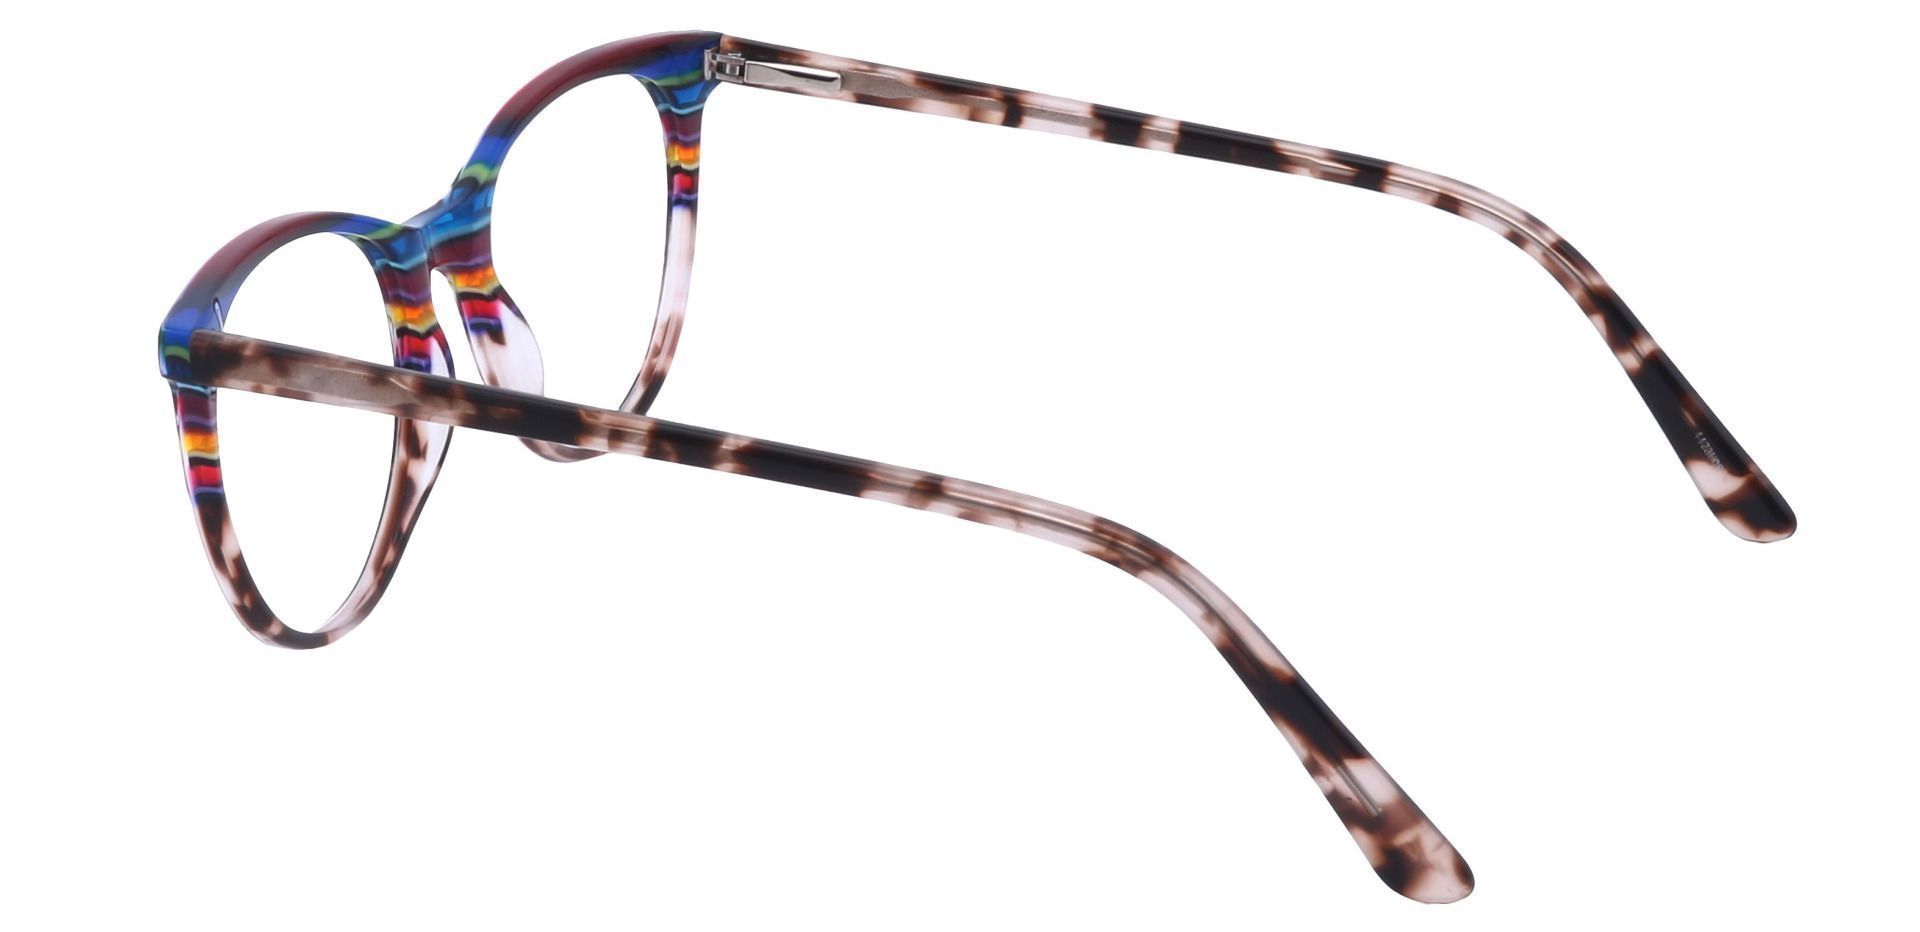 Patagonia Oval Lined Bifocal Glasses - Multi Colored Stripes